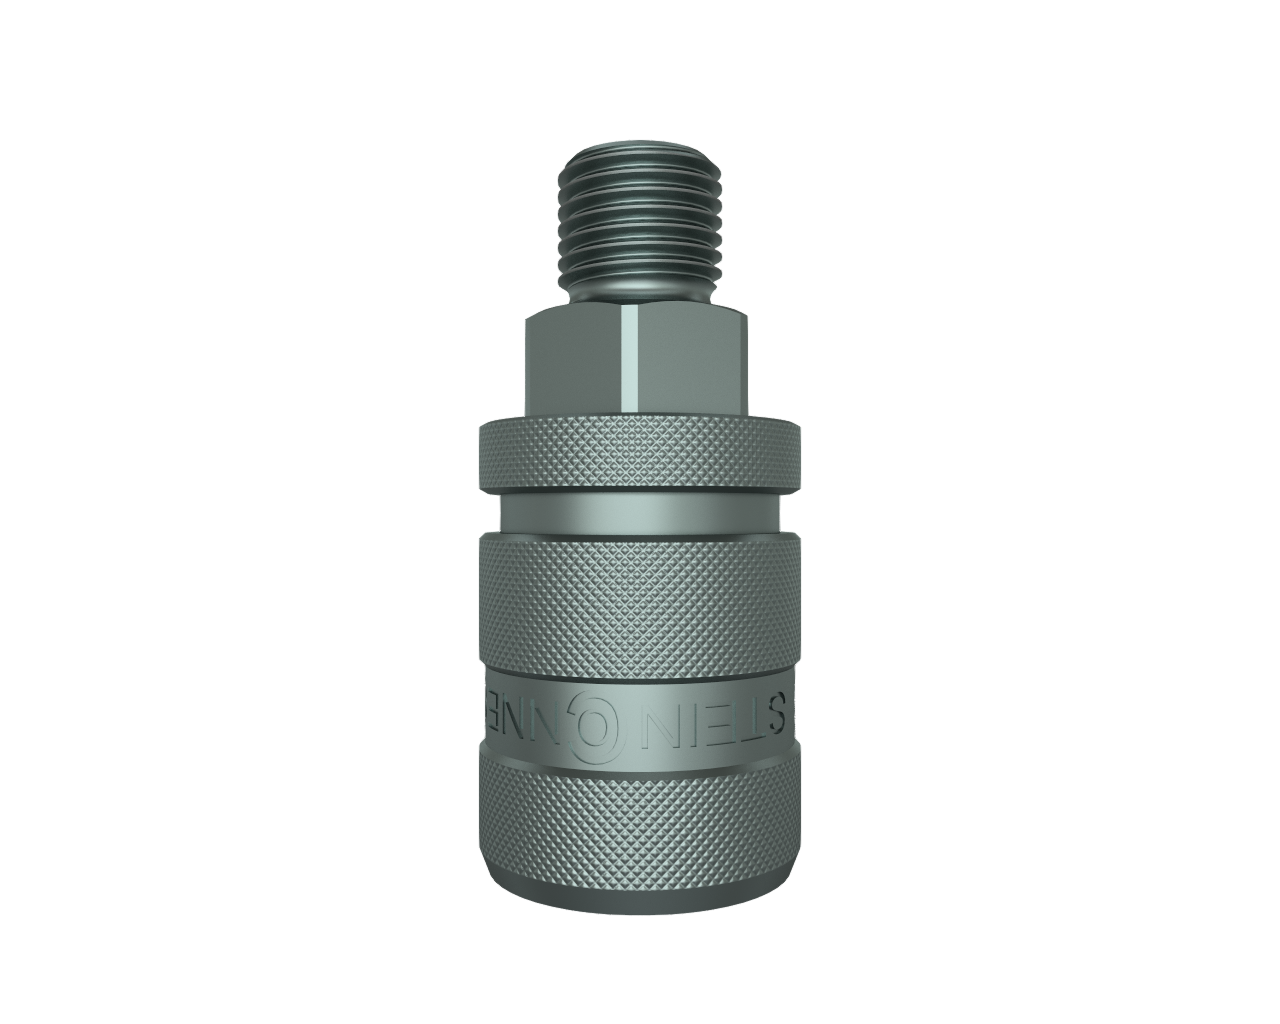 Article: O1A50, Nominal Width|5 mm, Connection| 1/4, Flow Rate|710 l/min